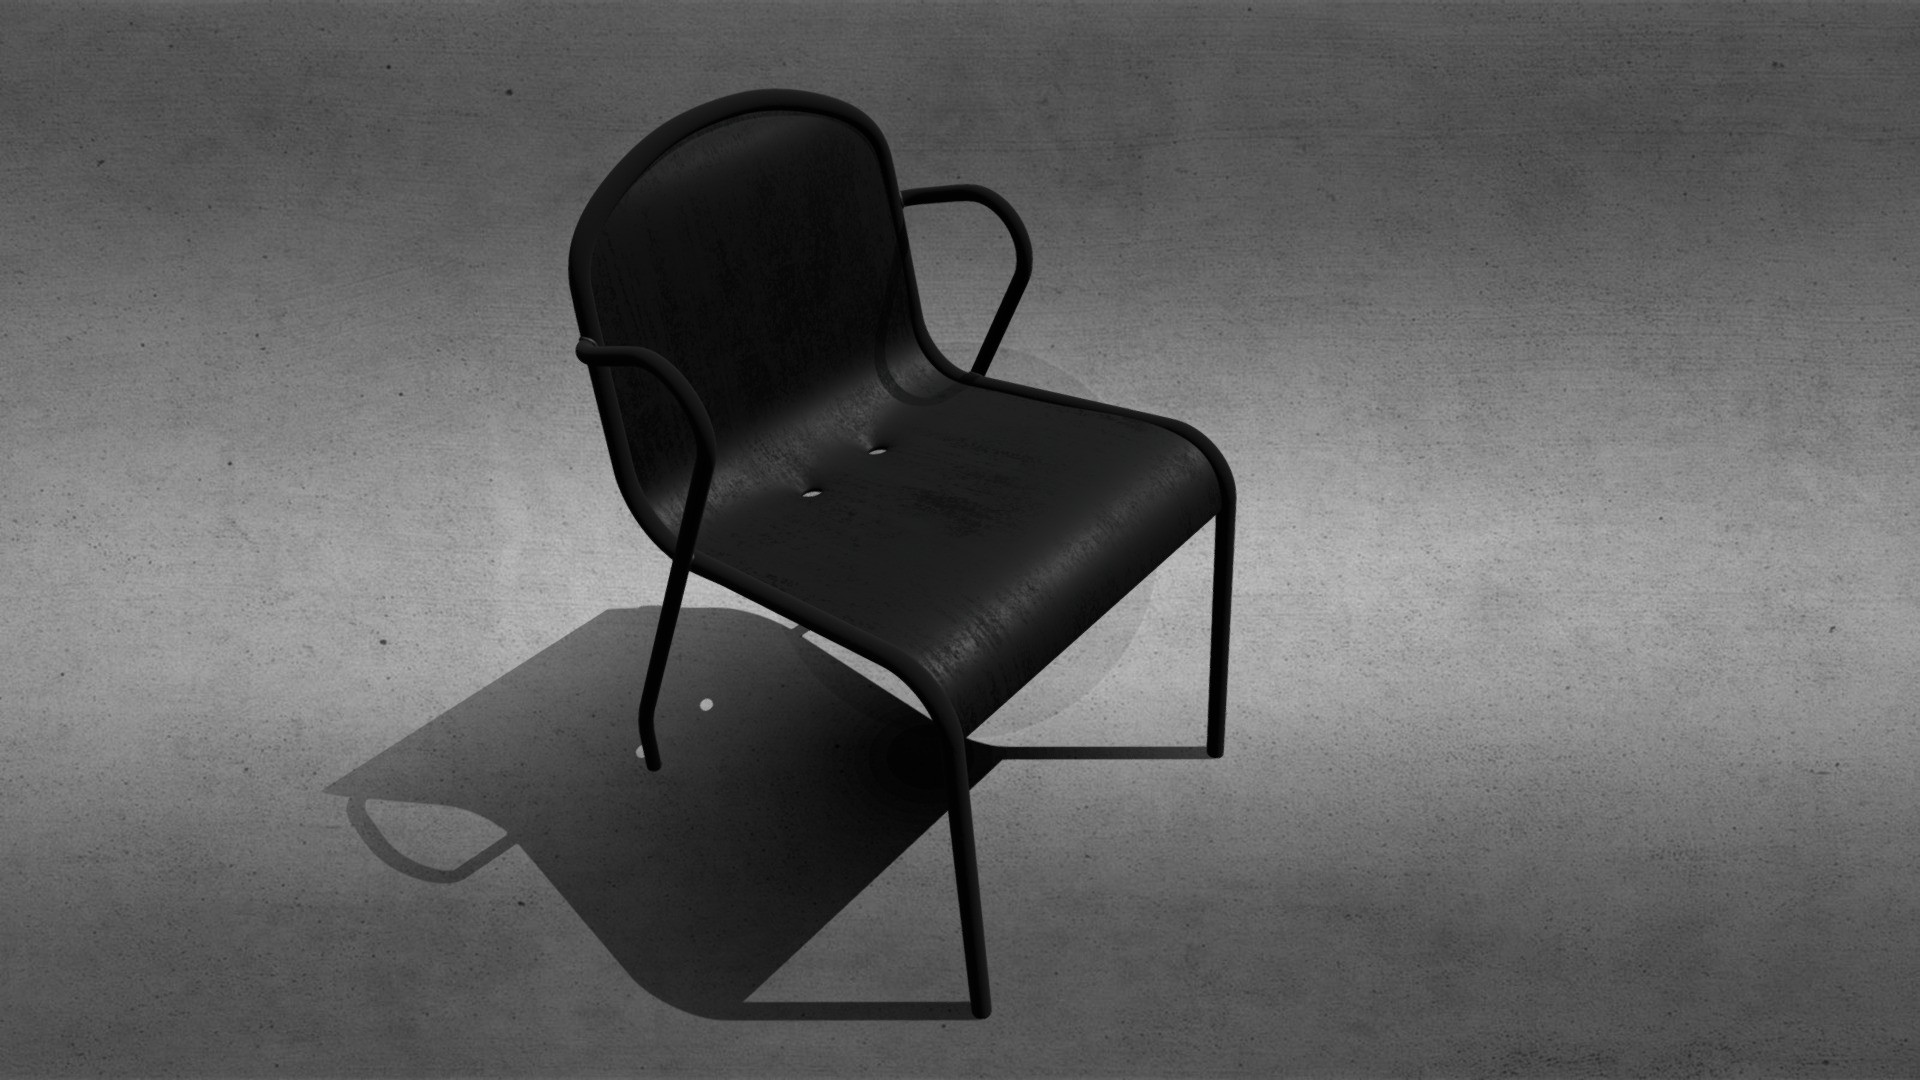 3D model IKEA – Tunholmen Chair – Silla - This is a 3D model of the IKEA - Tunholmen Chair - Silla. The 3D model is about a black chair on a grey surface.